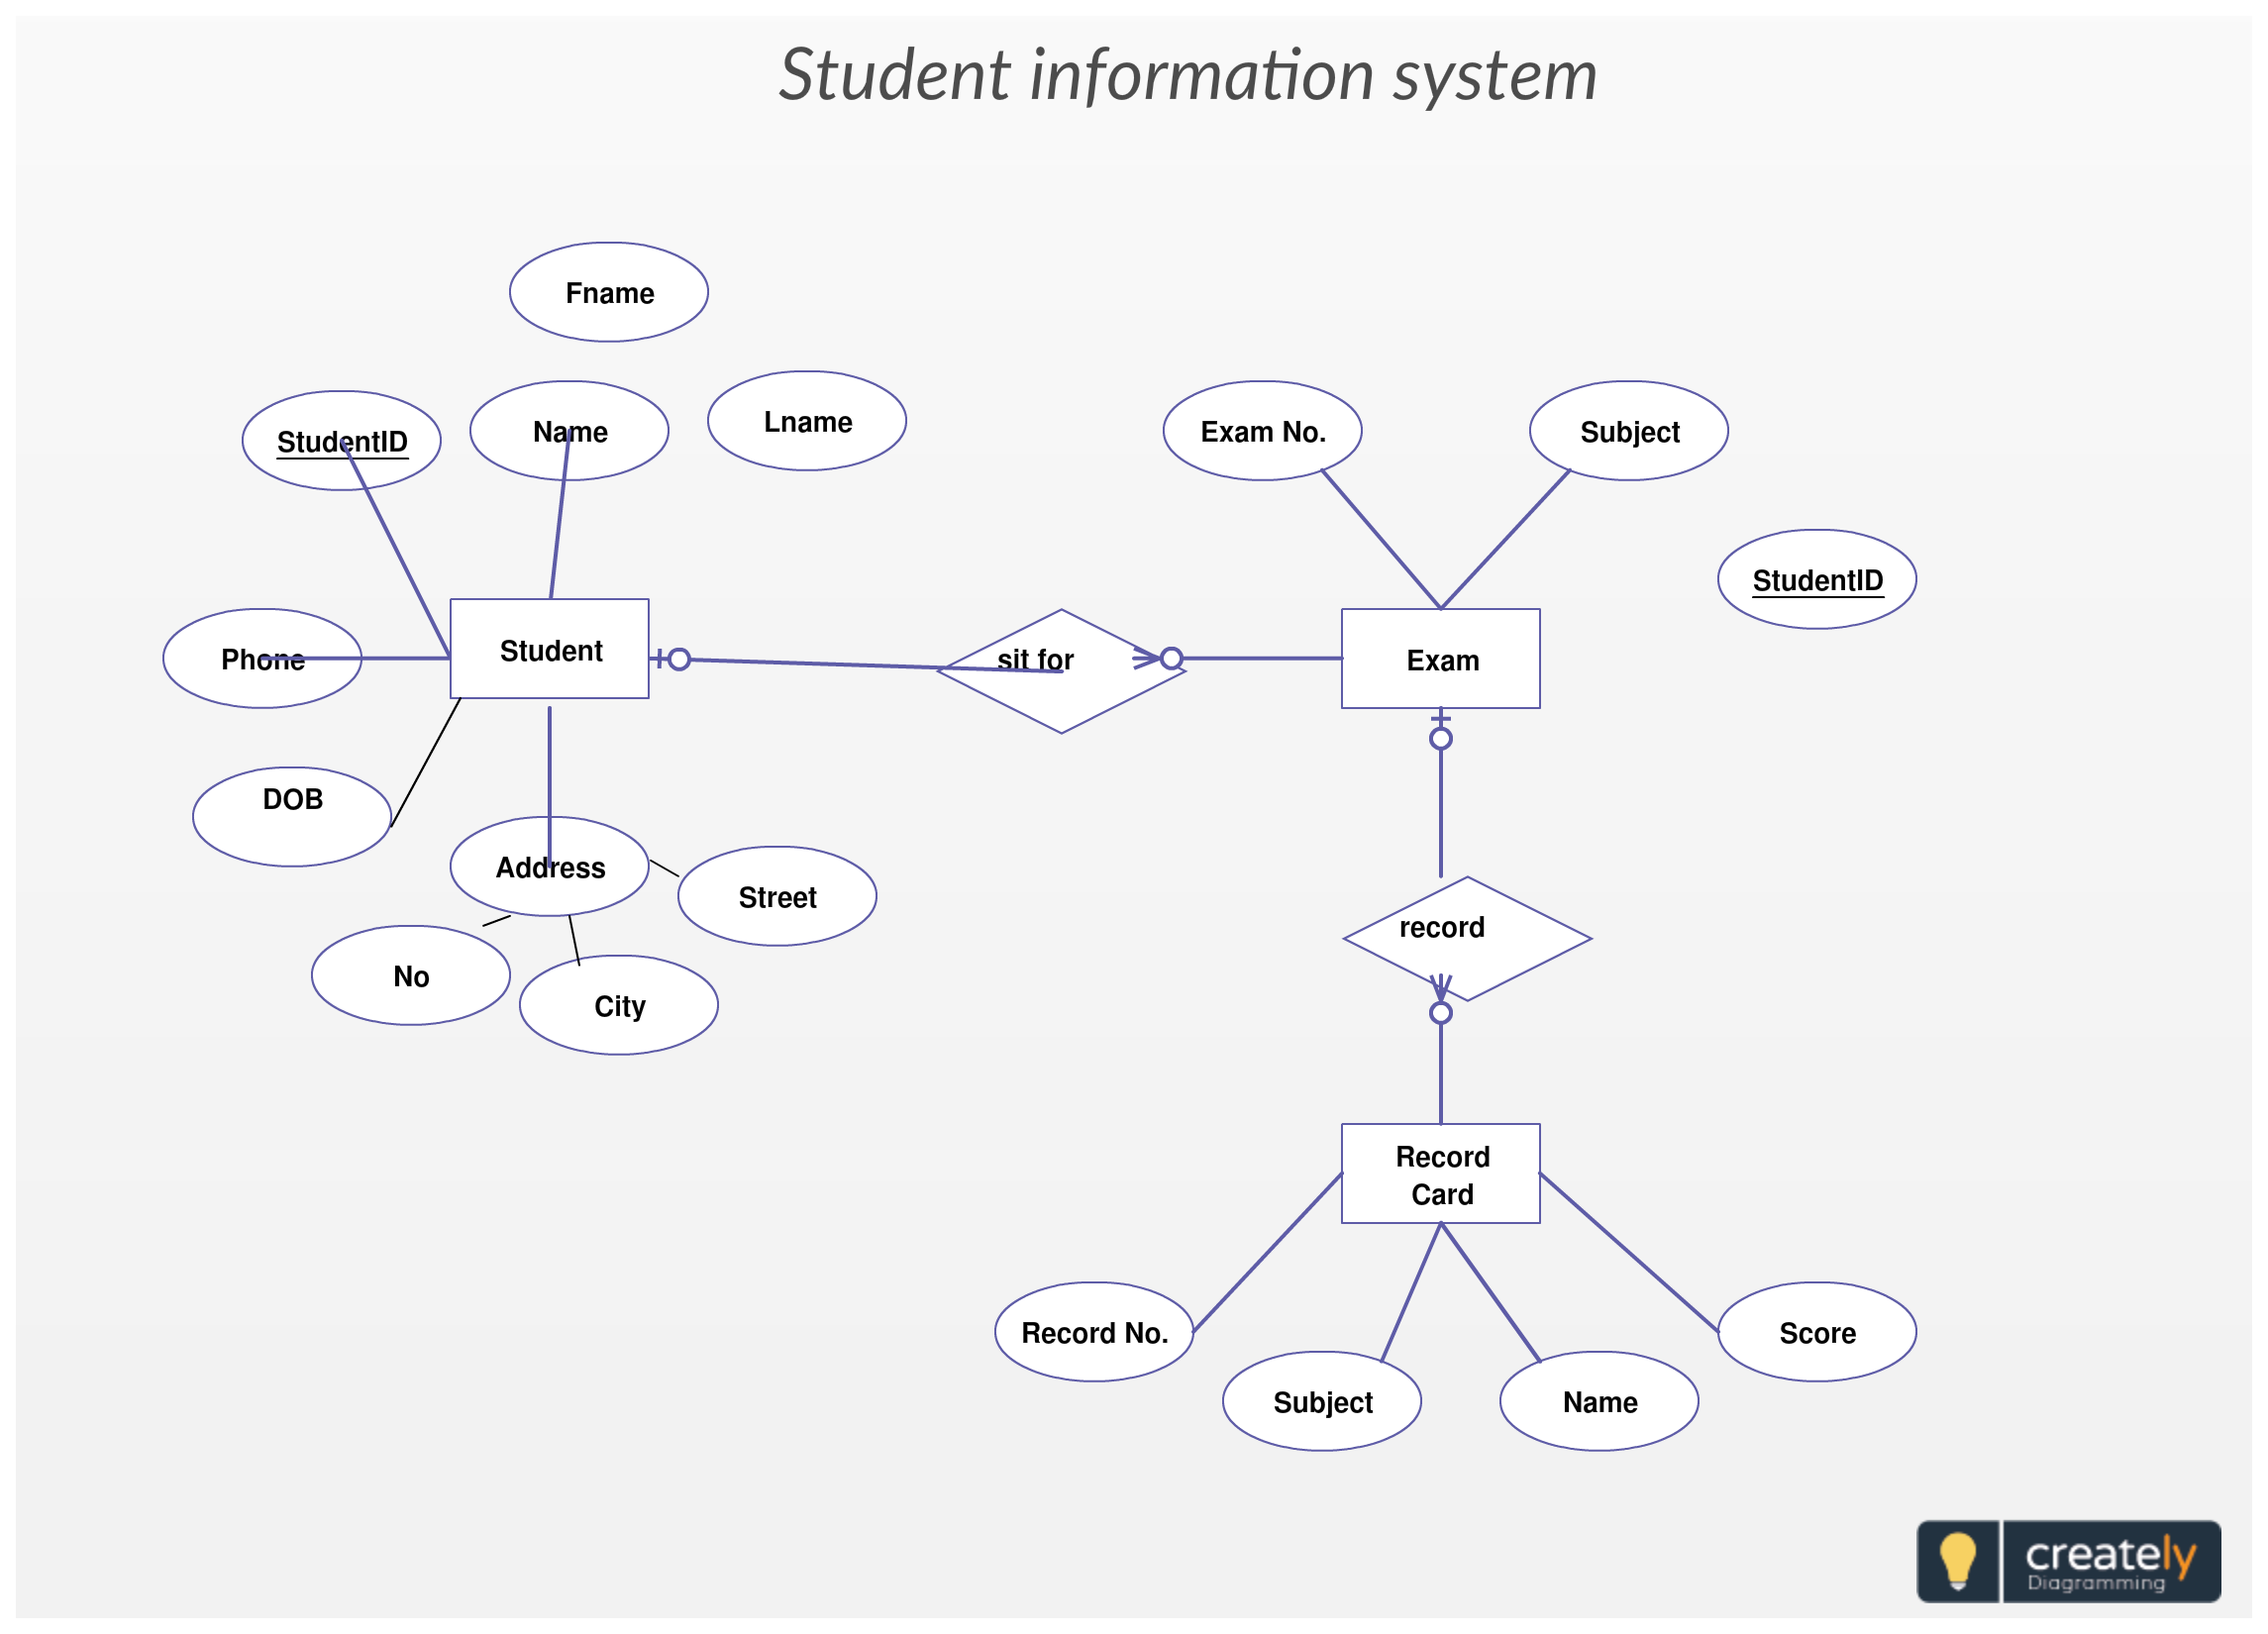 Entity Relationship Diagram For Student Information System